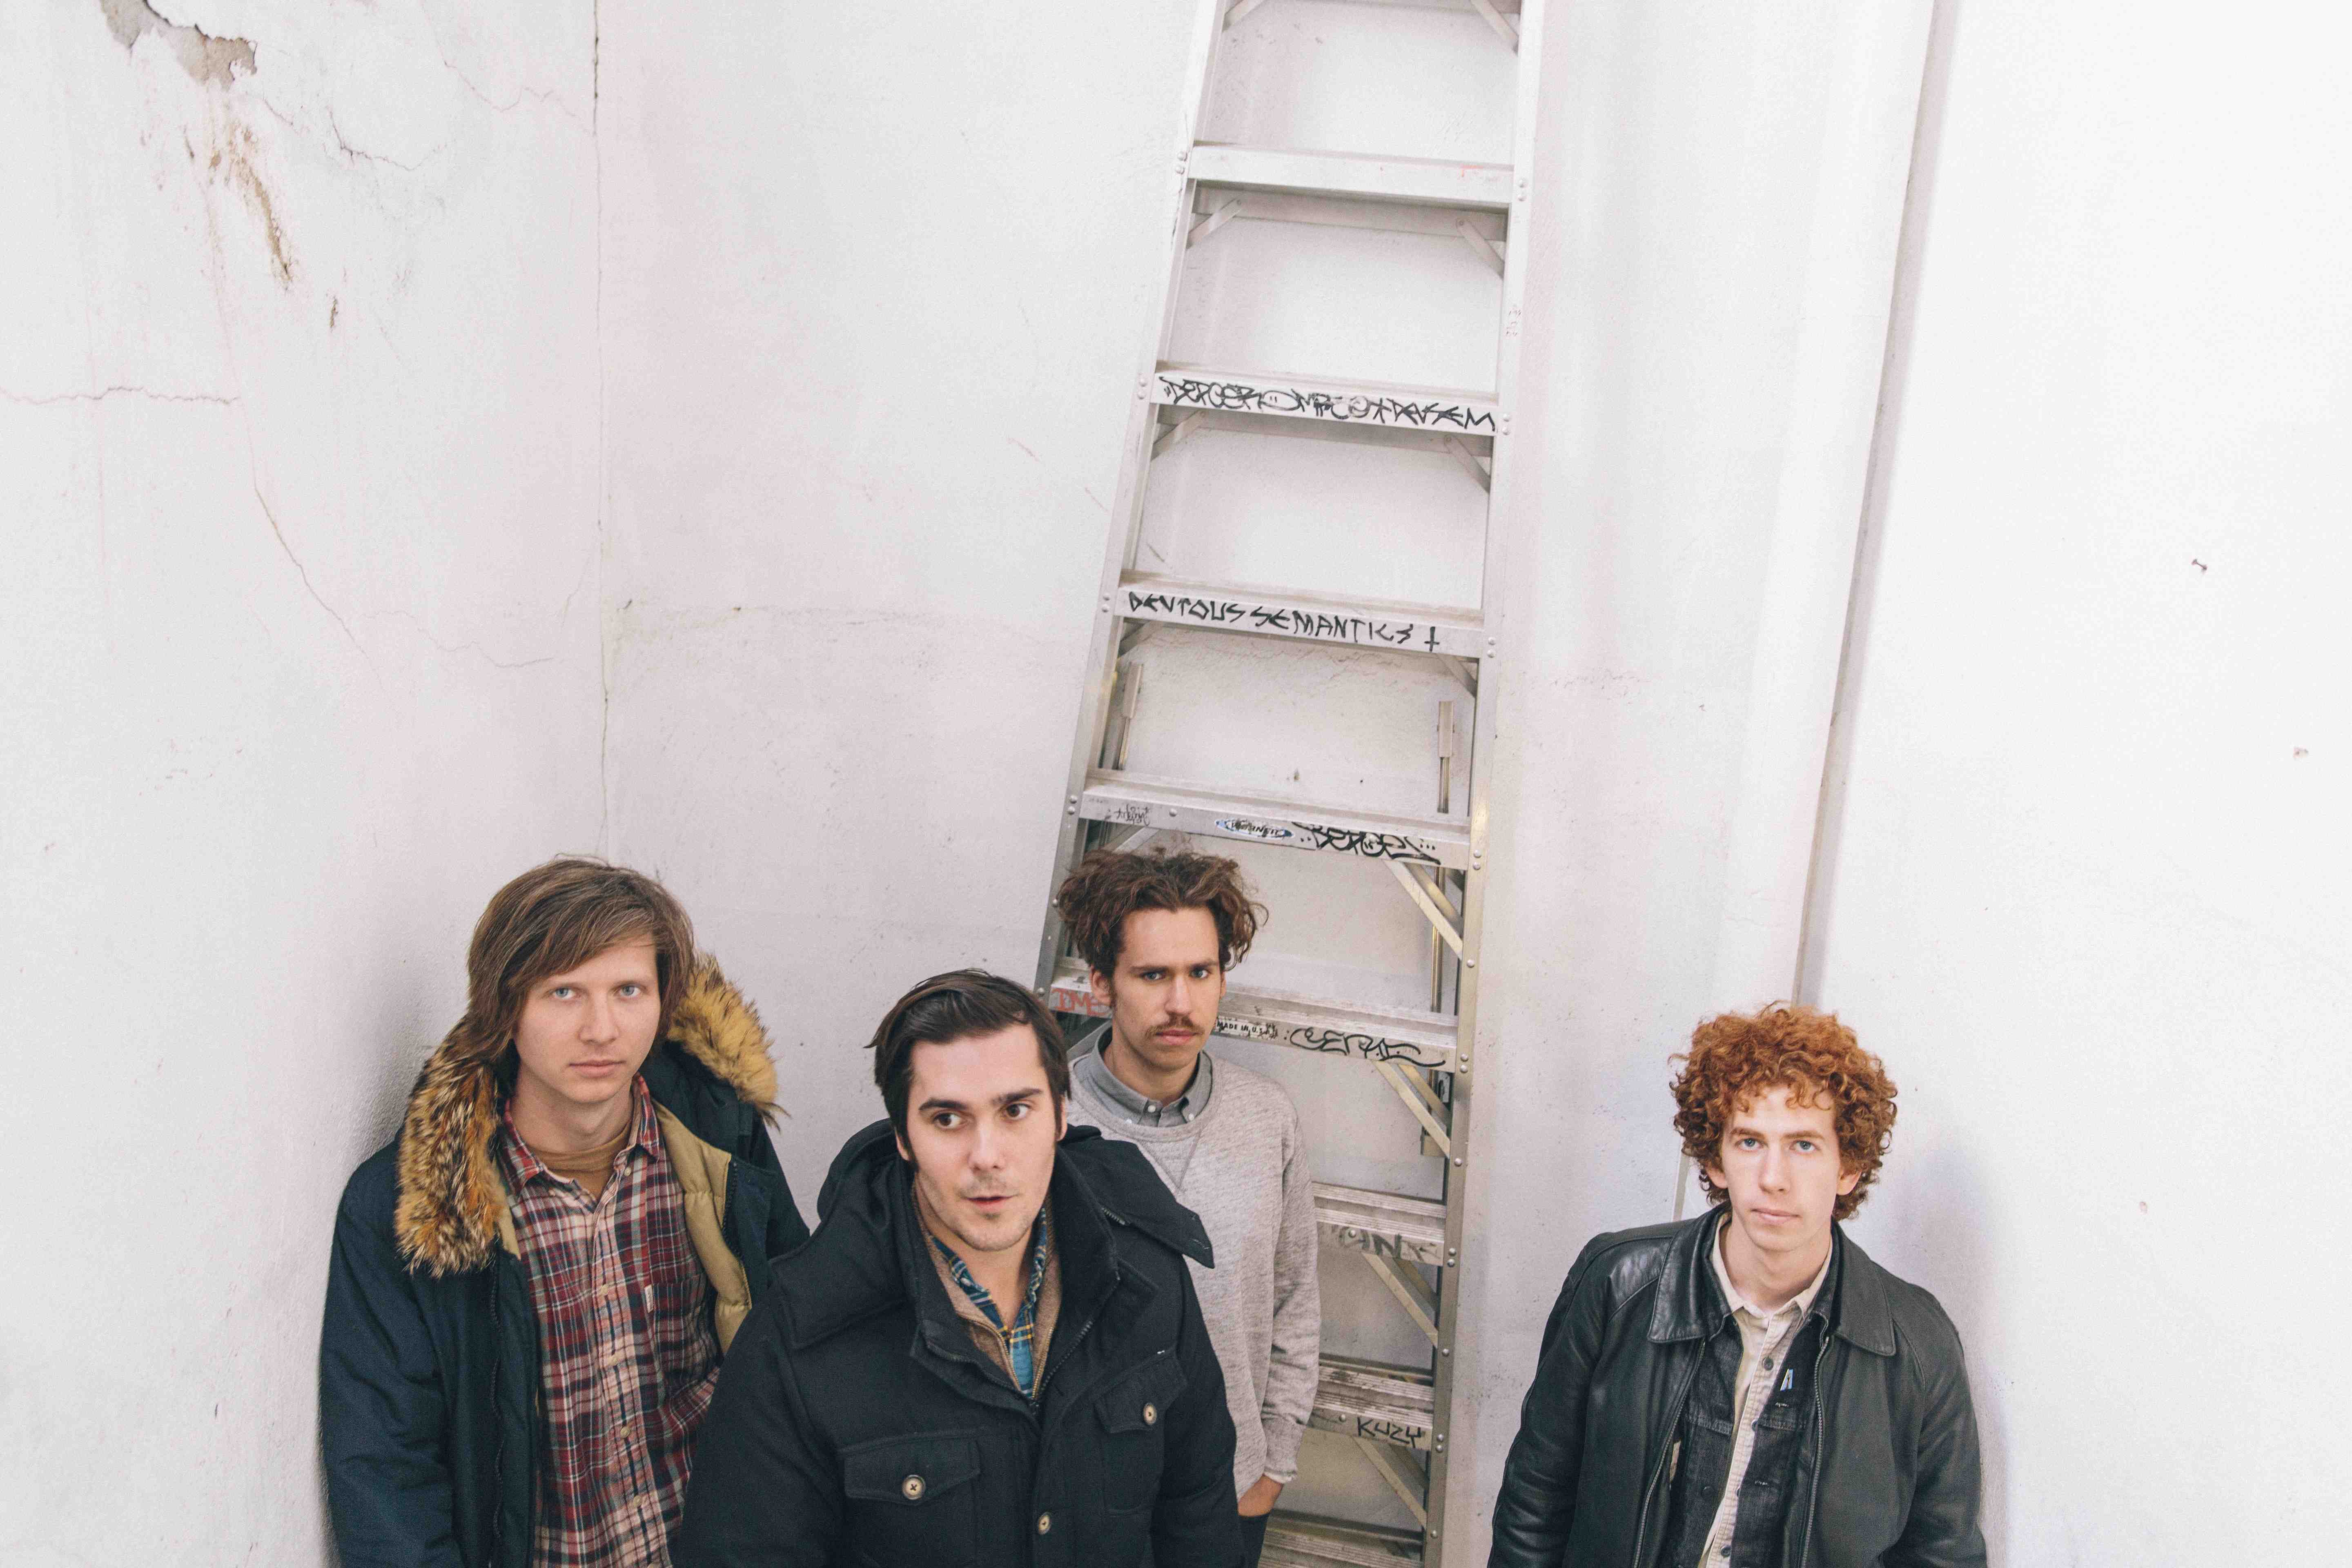 Parquet Courts (US) at MeetFactory on October 19 MeetFactory Music